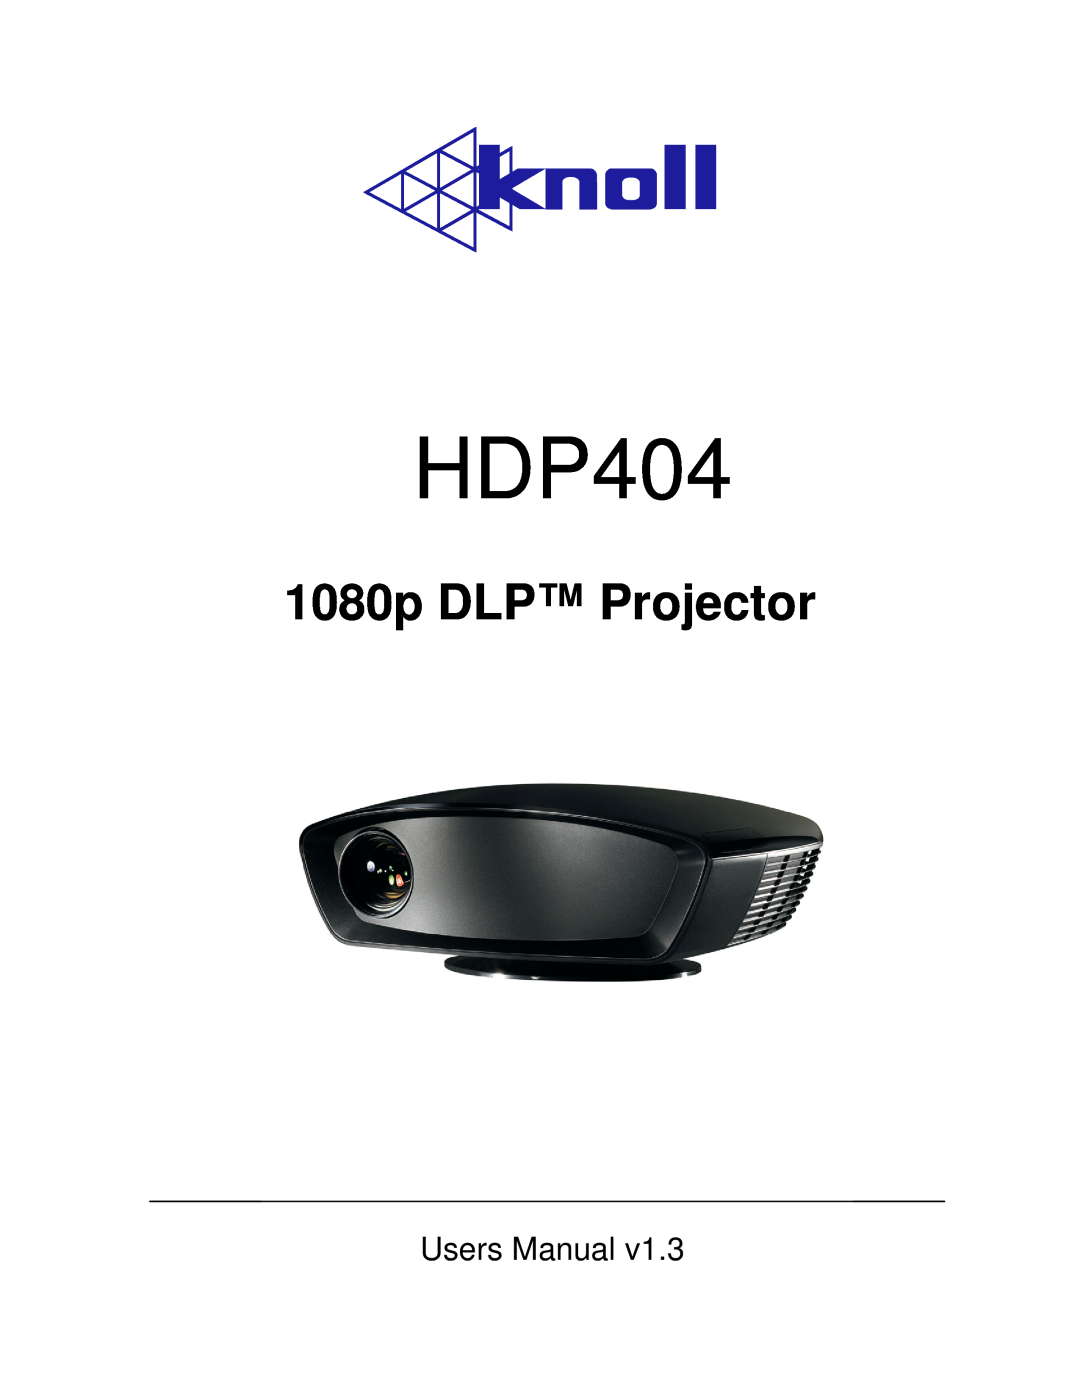 Knoll Systems HDP404 user manual 1080p DLP Projector, Users Manual 